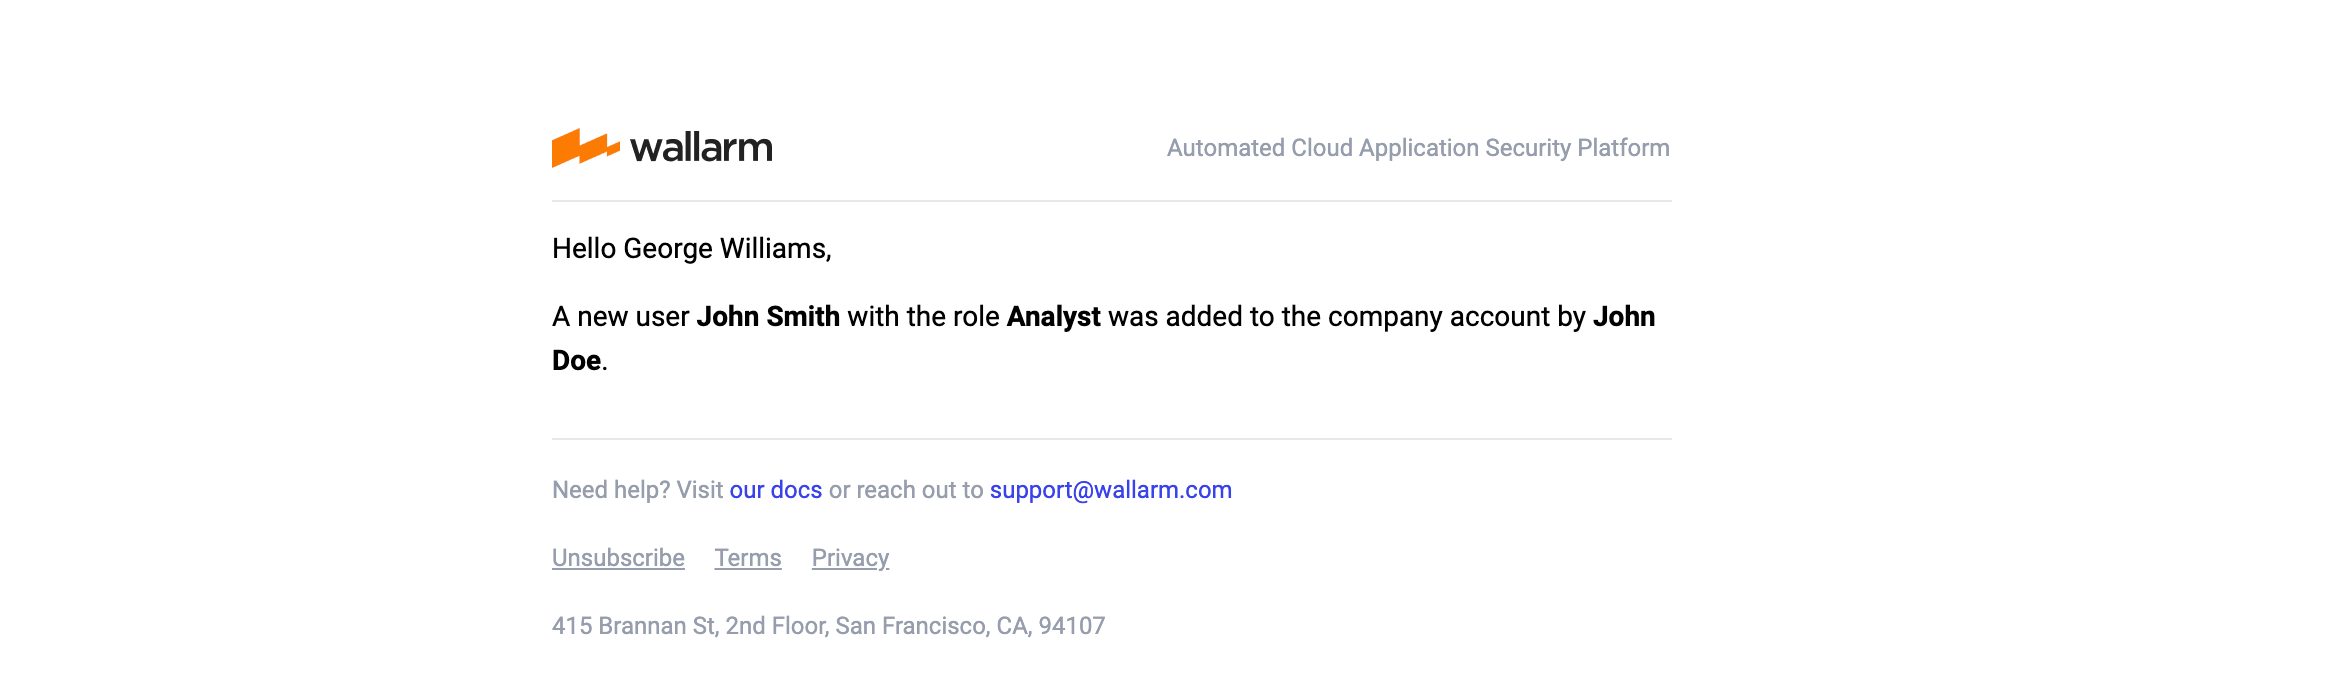 Email about new user added